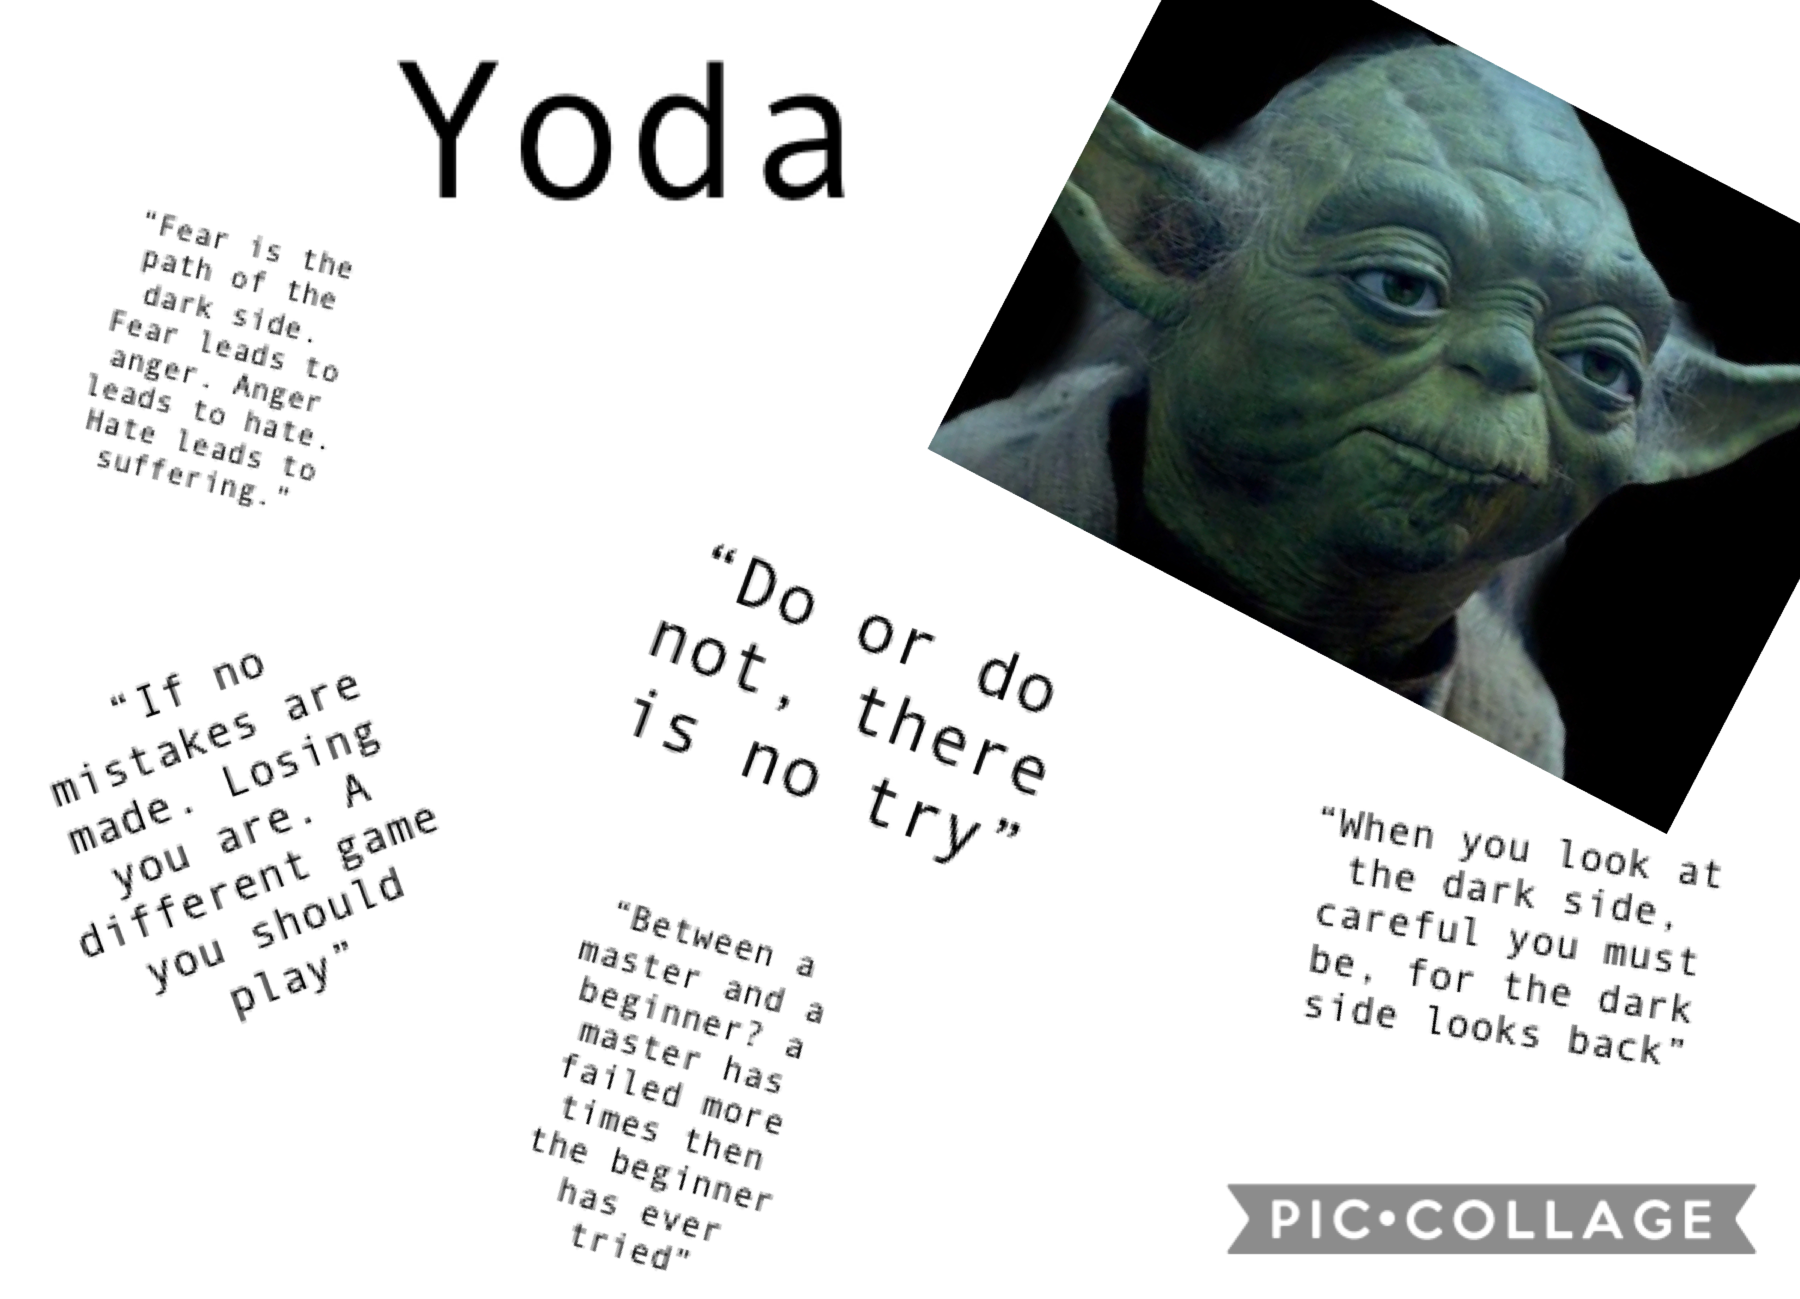 For the Star Wars fans yoda quotes like if you want more